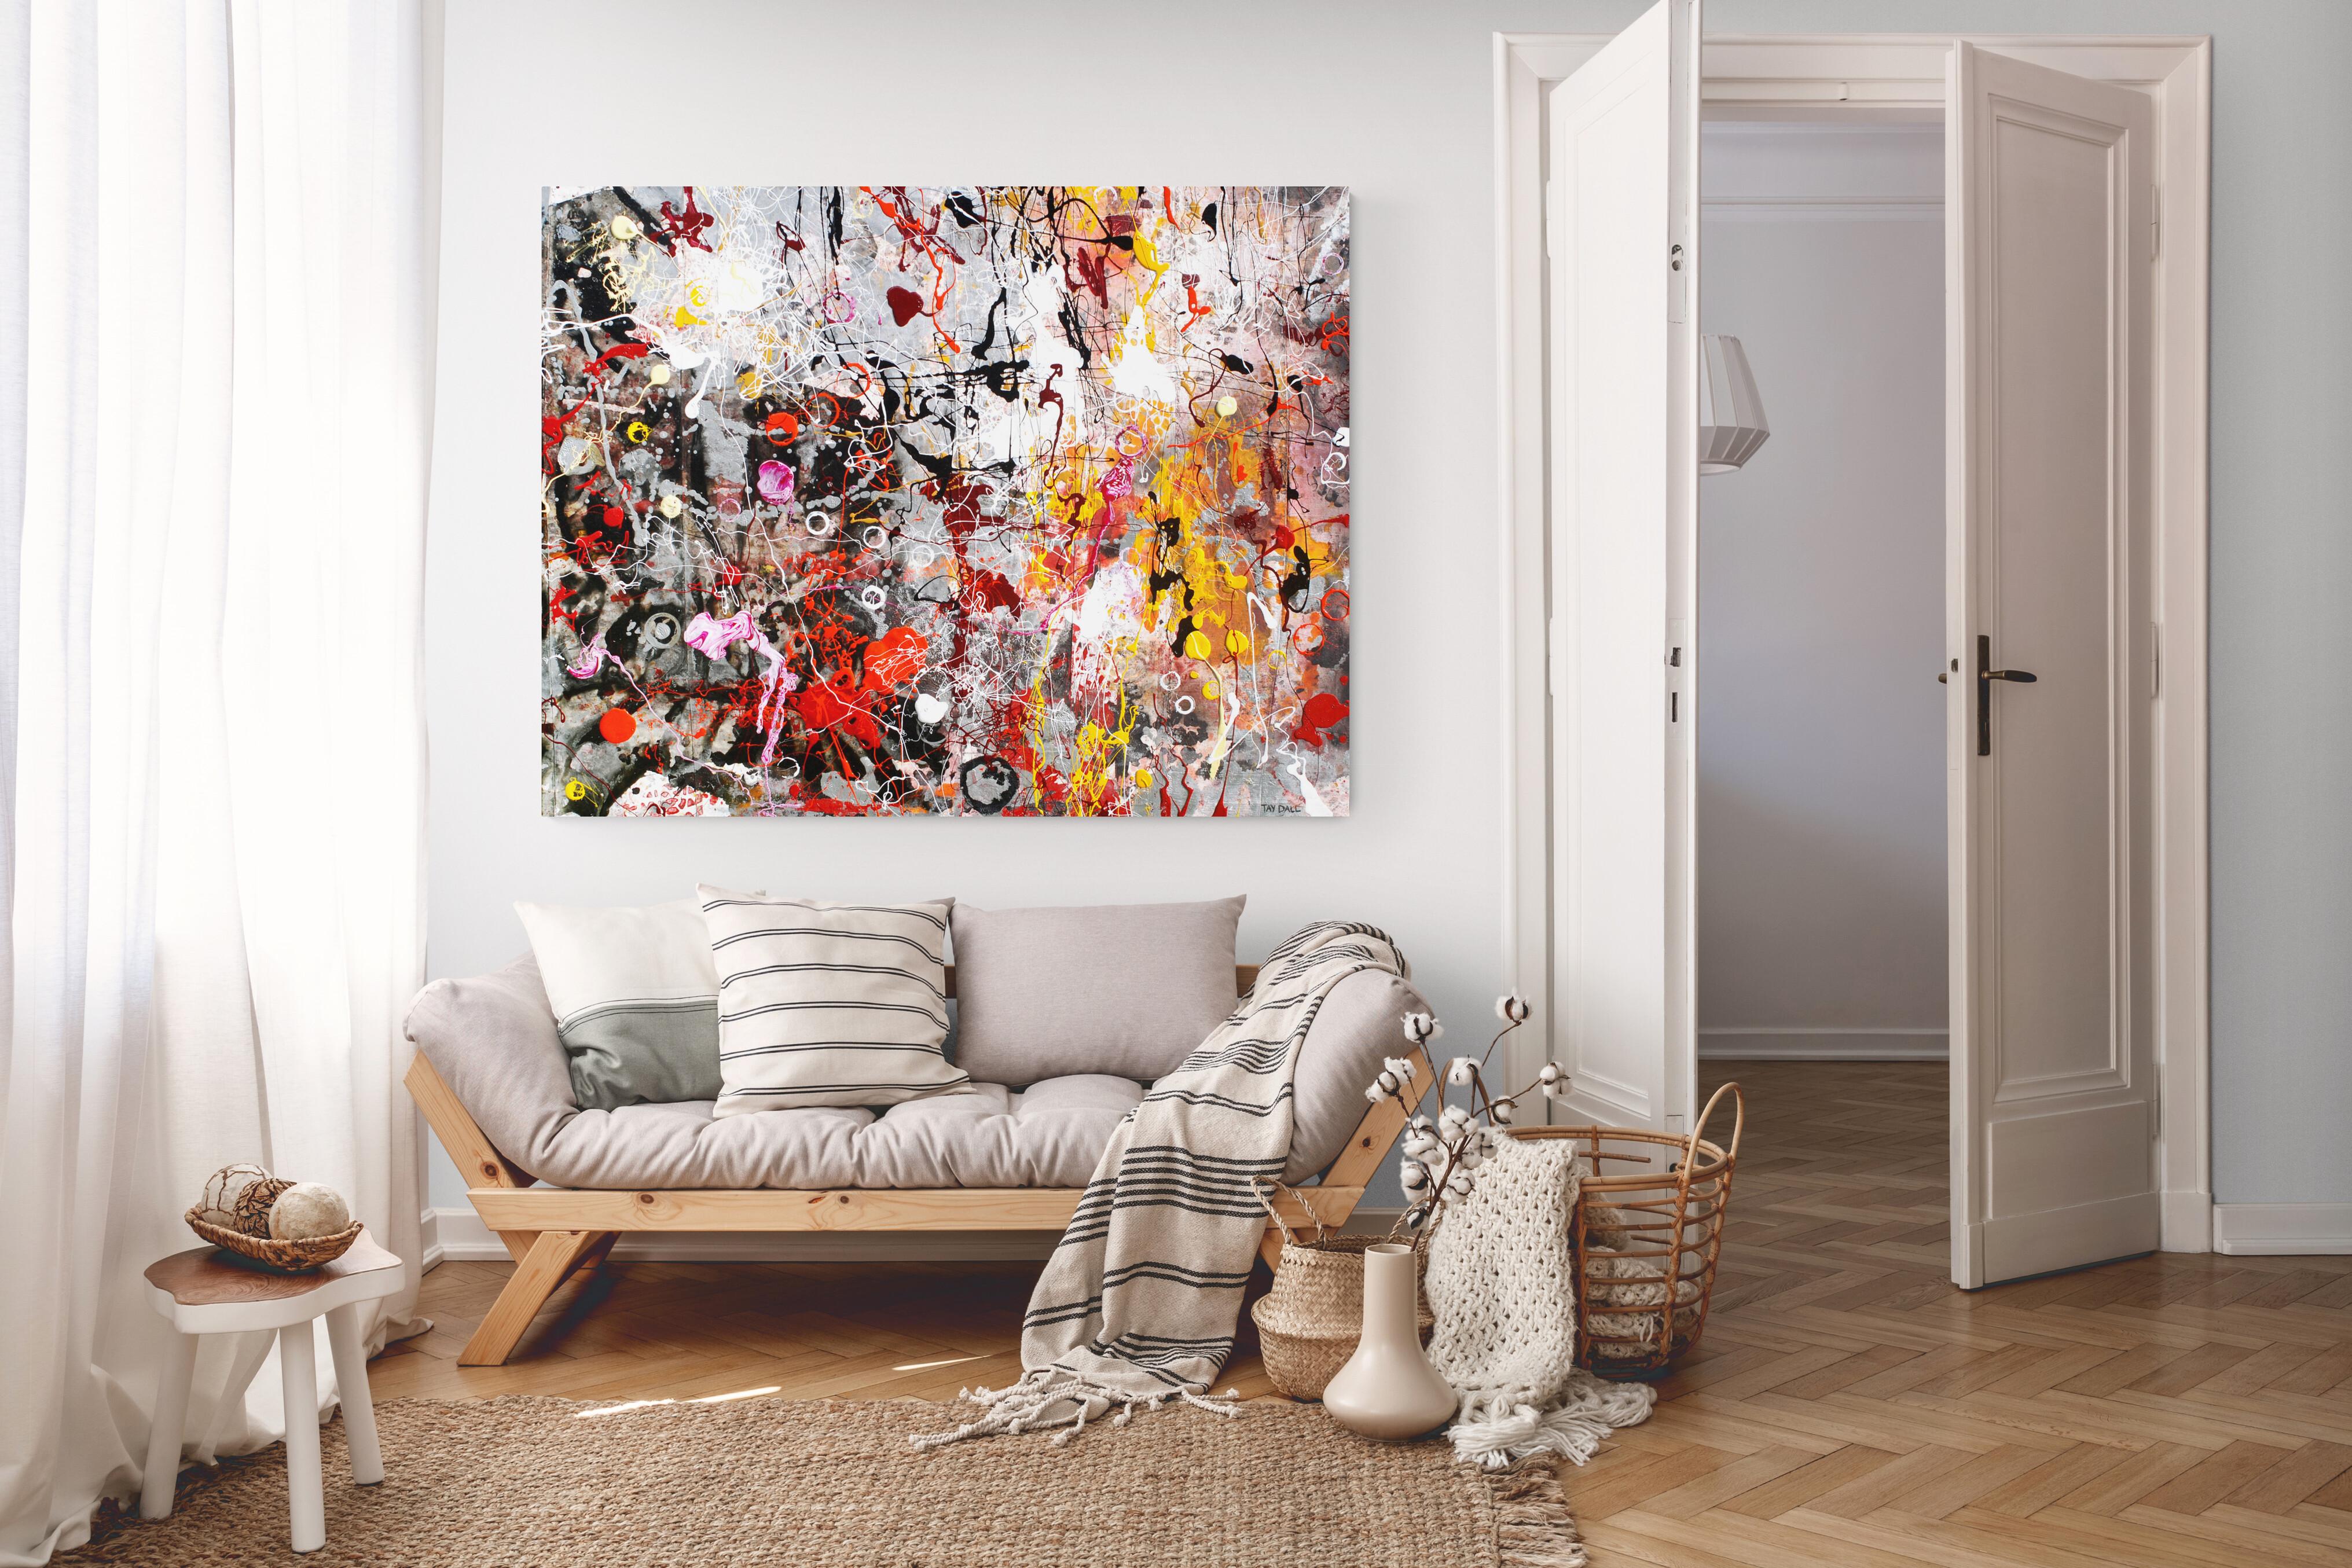 Large Splattered Abstract Painting 